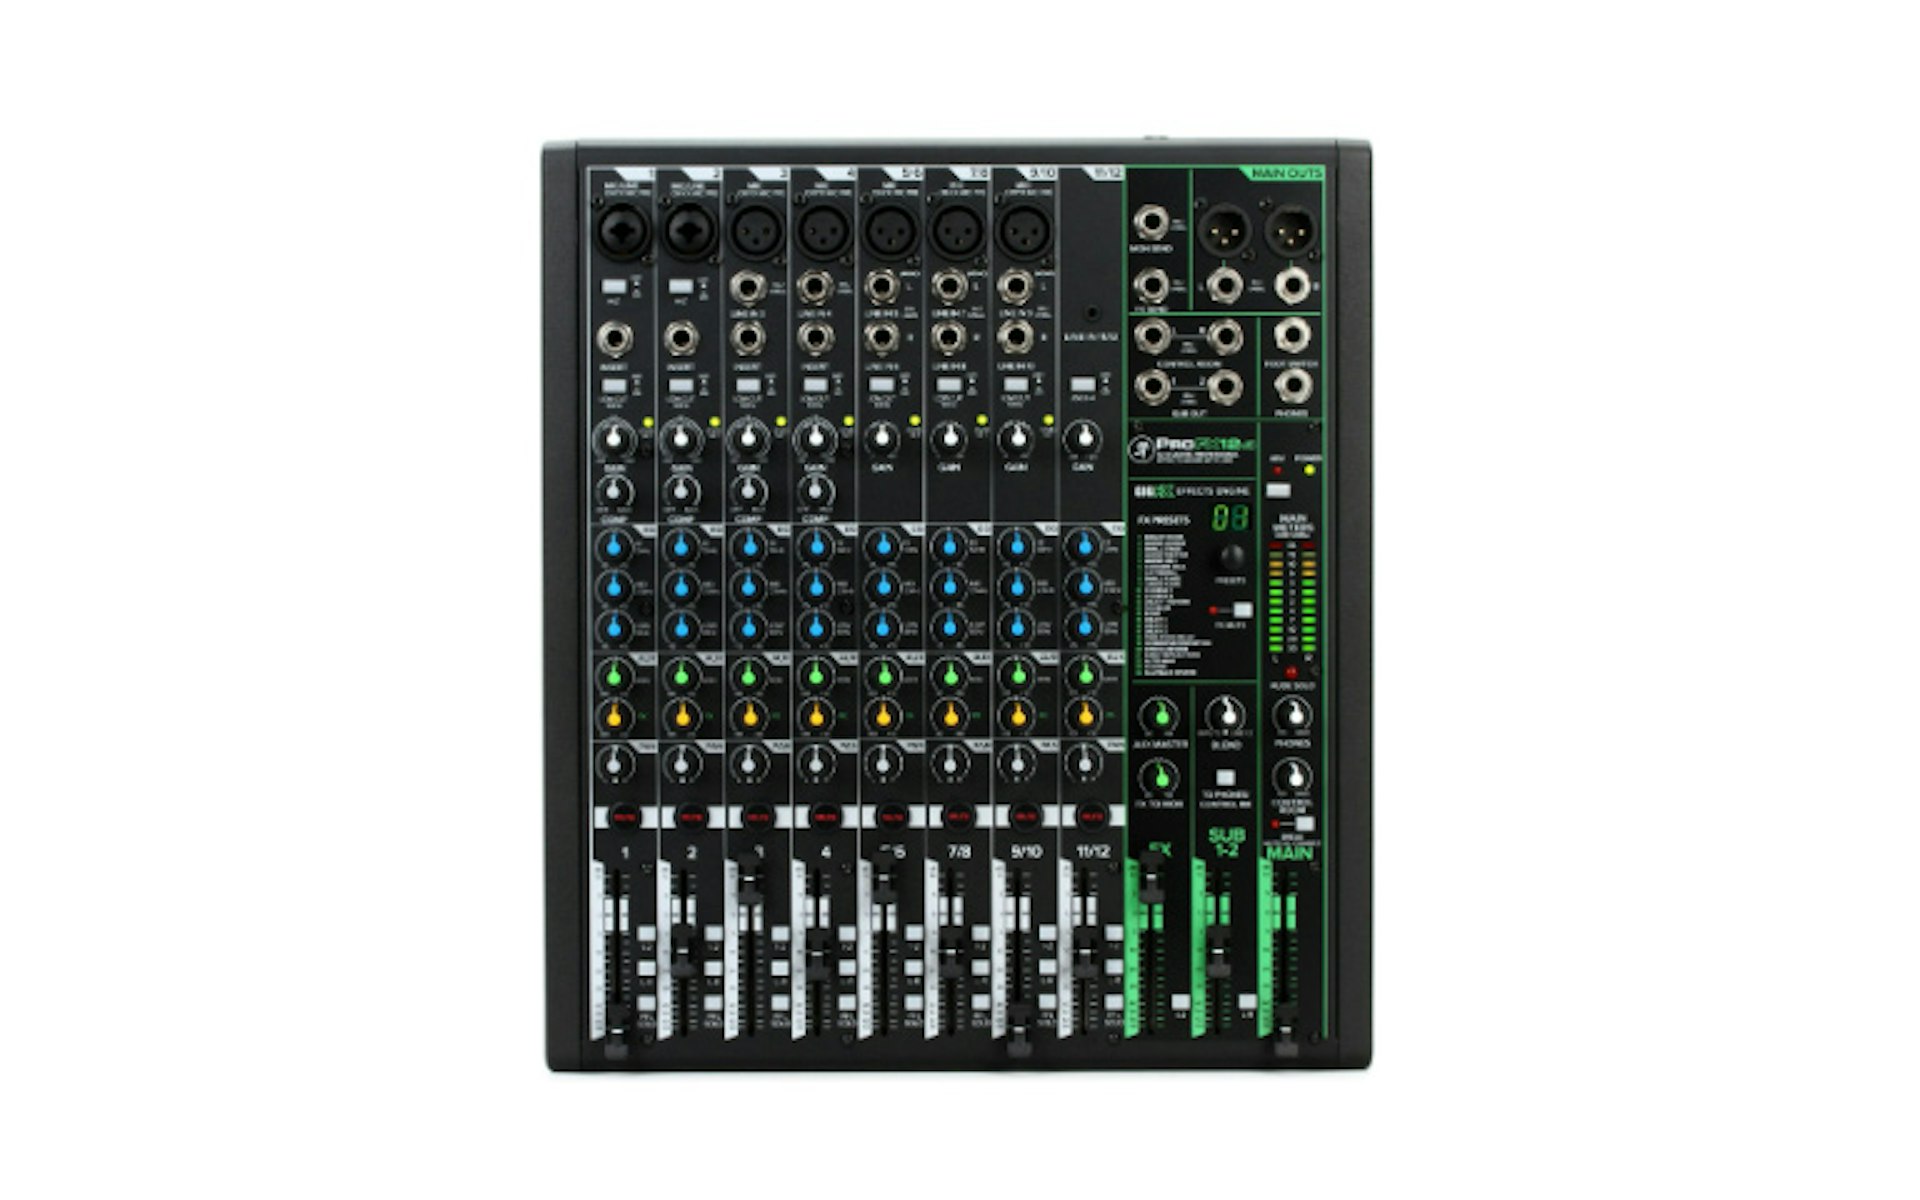 Here’s why the Mackie ProFX is one of the best podcast mixers